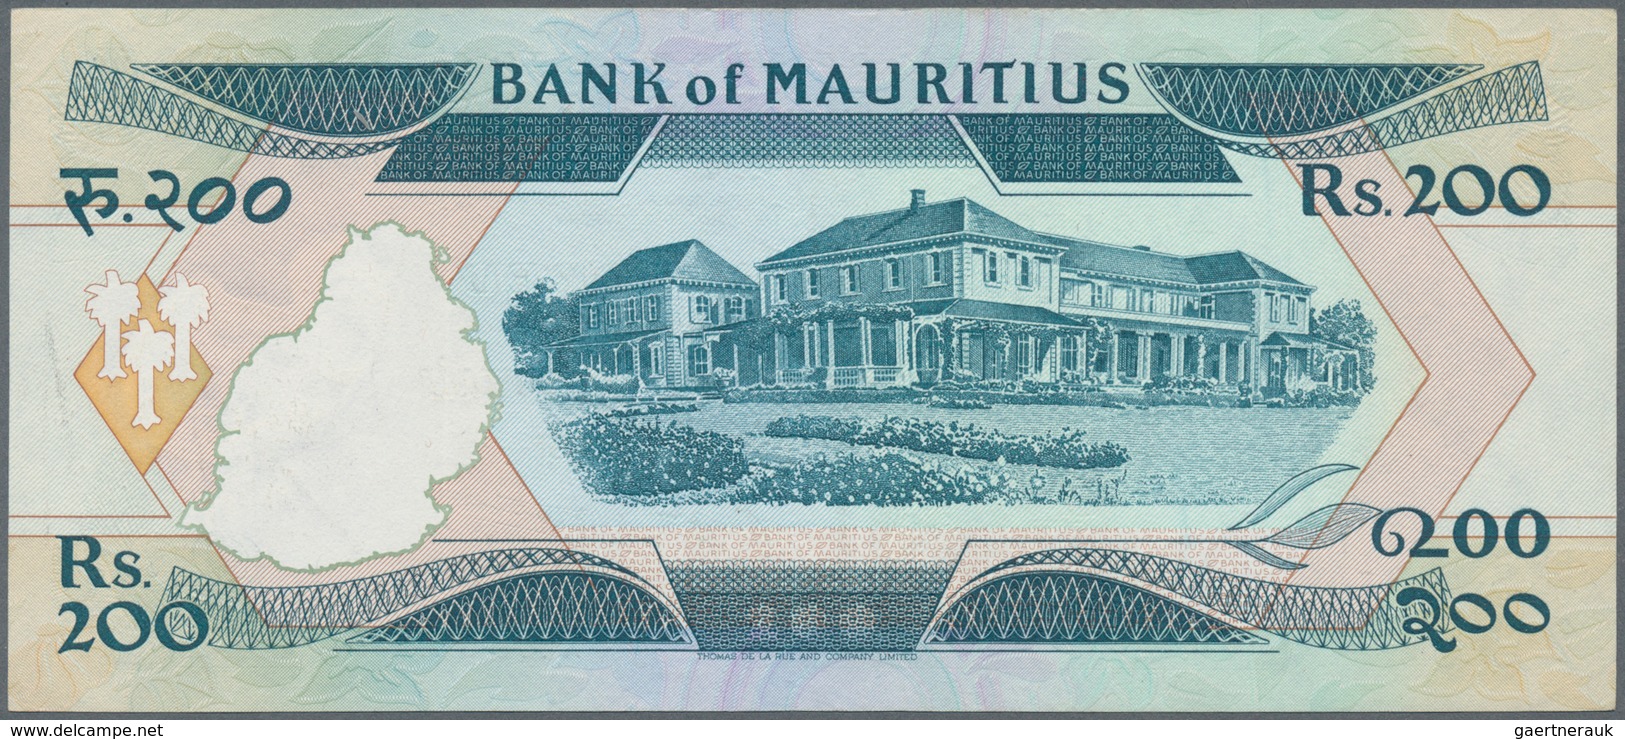 Mauritius: Pair With 500 Rupees ND(1988) P.40b (VF+) And 200 Rupees ND(1985) P.39 (UNC). (2 Pcs.) - Maurice